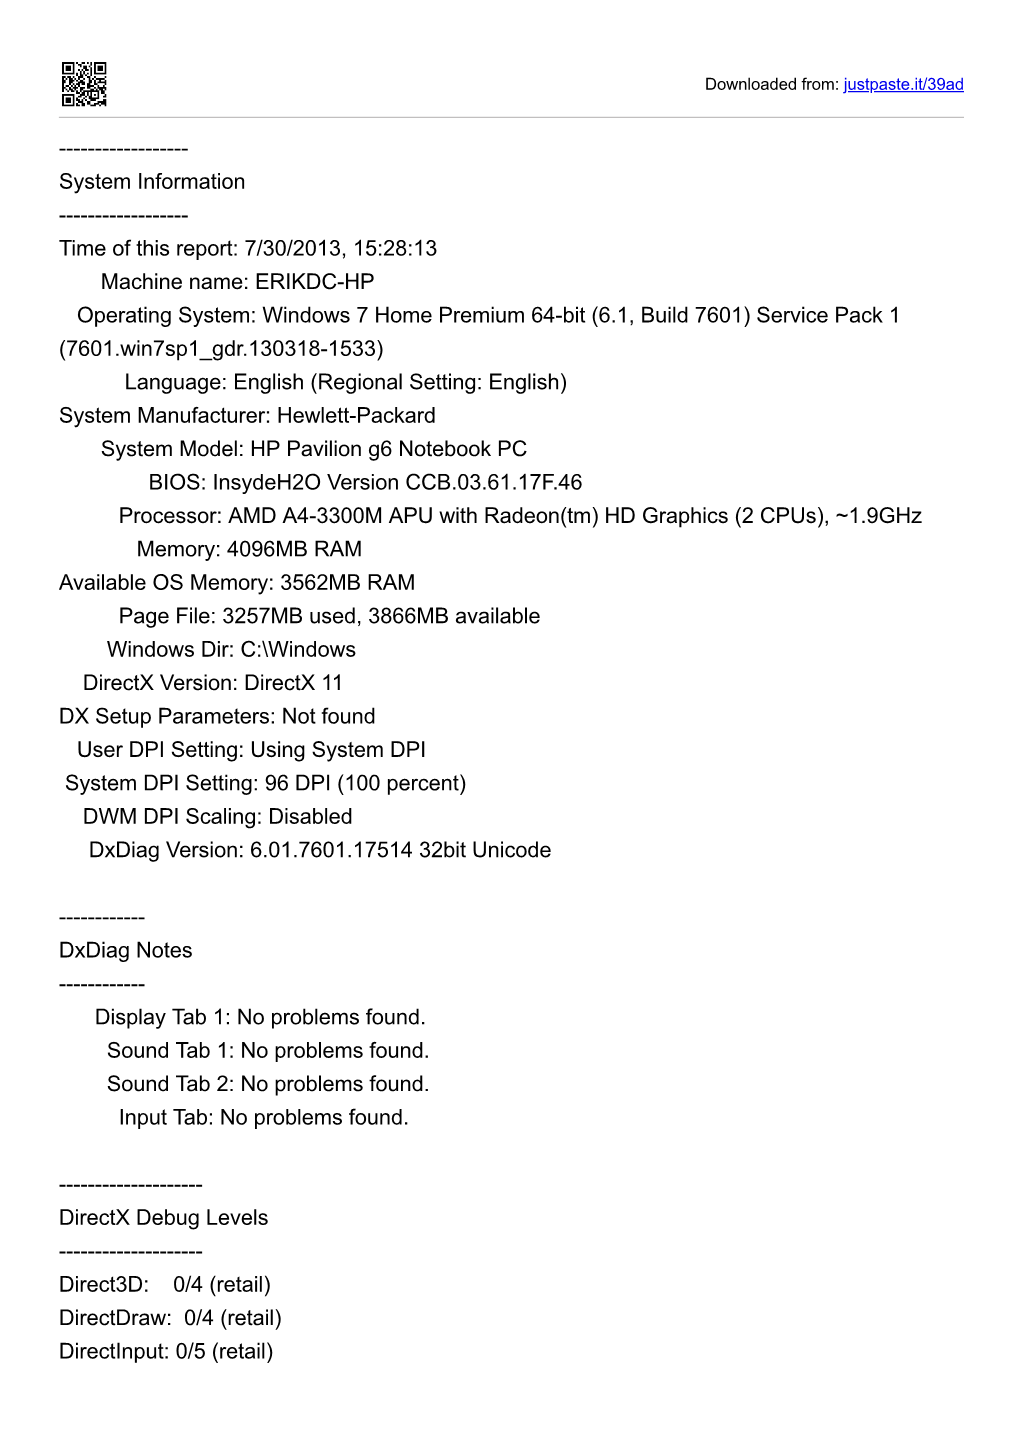 System Information ---Time of This Report: 7/30/2013, 15:28:13 Machine Name